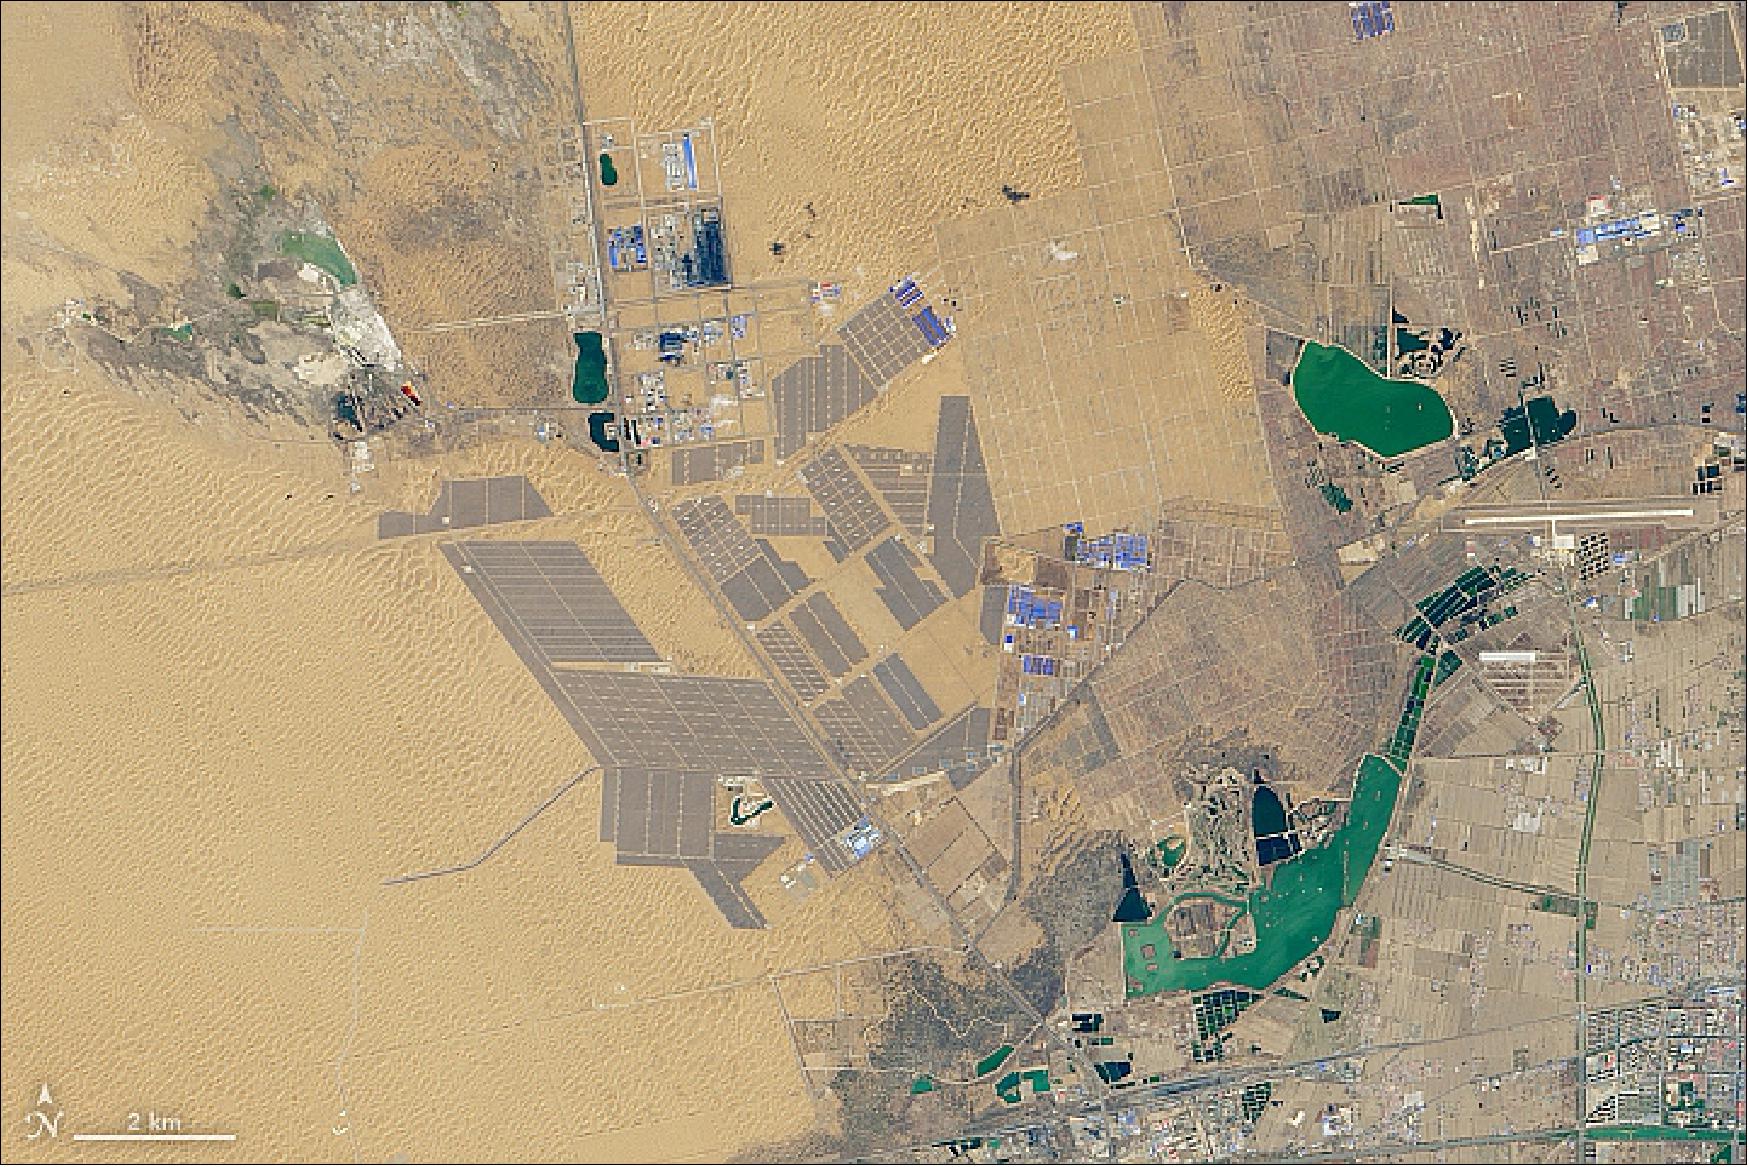 Figure 70: The Operational Land Imager (OLI) acquired this image the Tengger Desert Solar Park in northwestern China on 22 April 2019 (image credit: NASA Earth Observatory image by Joshua Stevens, using Landsat data from the U.S. Geological Survey. Story by Adam Voiland)